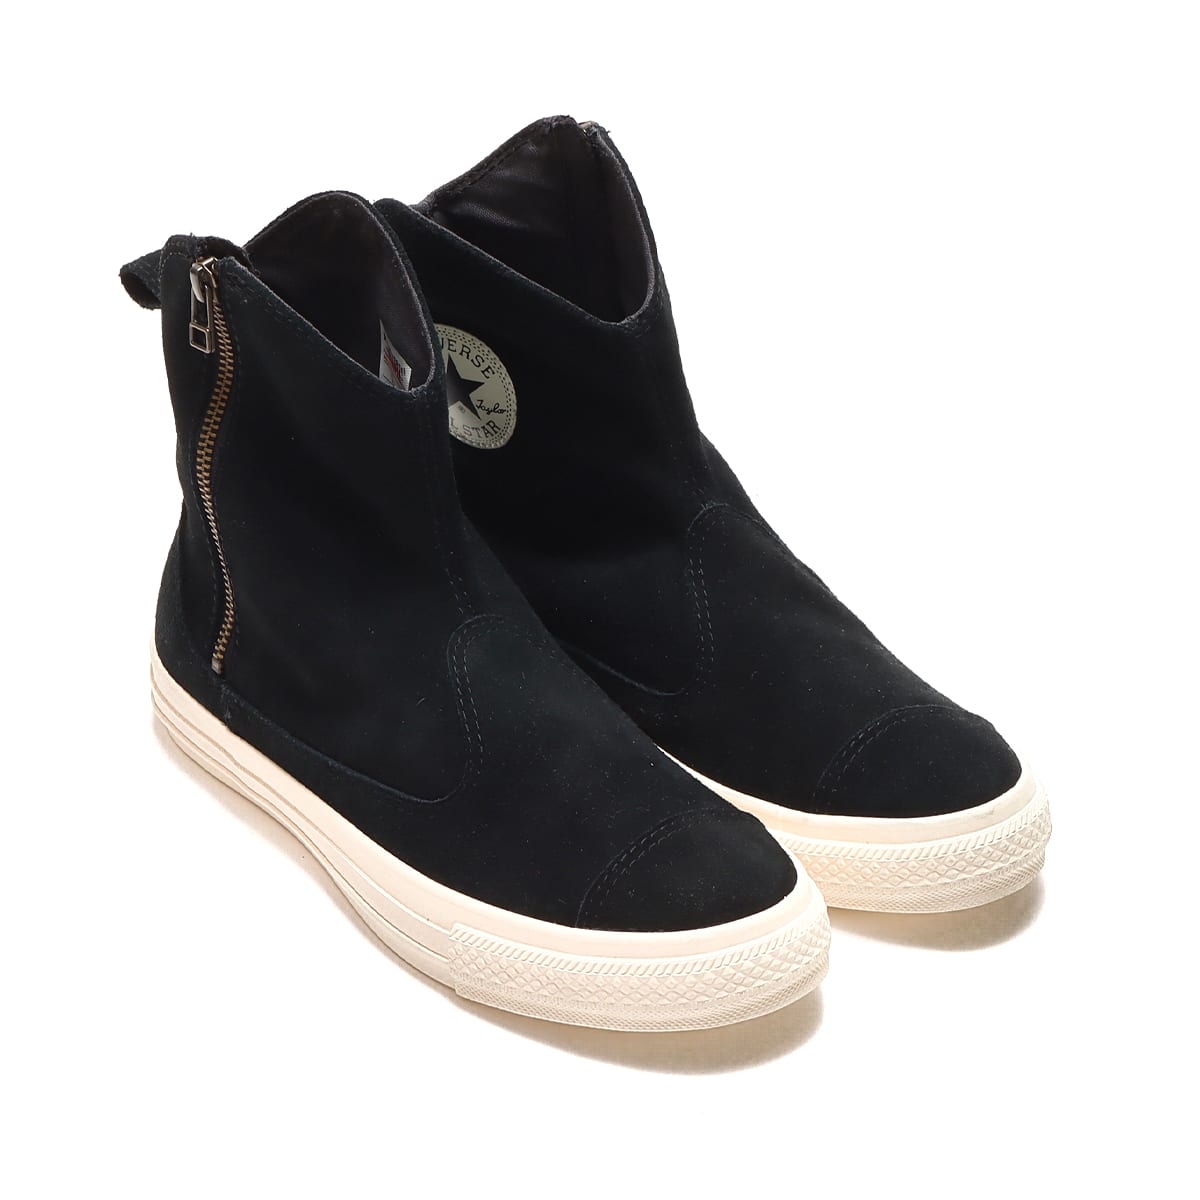 CONVERSE SUEDE AS WESTERNBOOTS II Z HI BLACK 22FW-I_photo_large